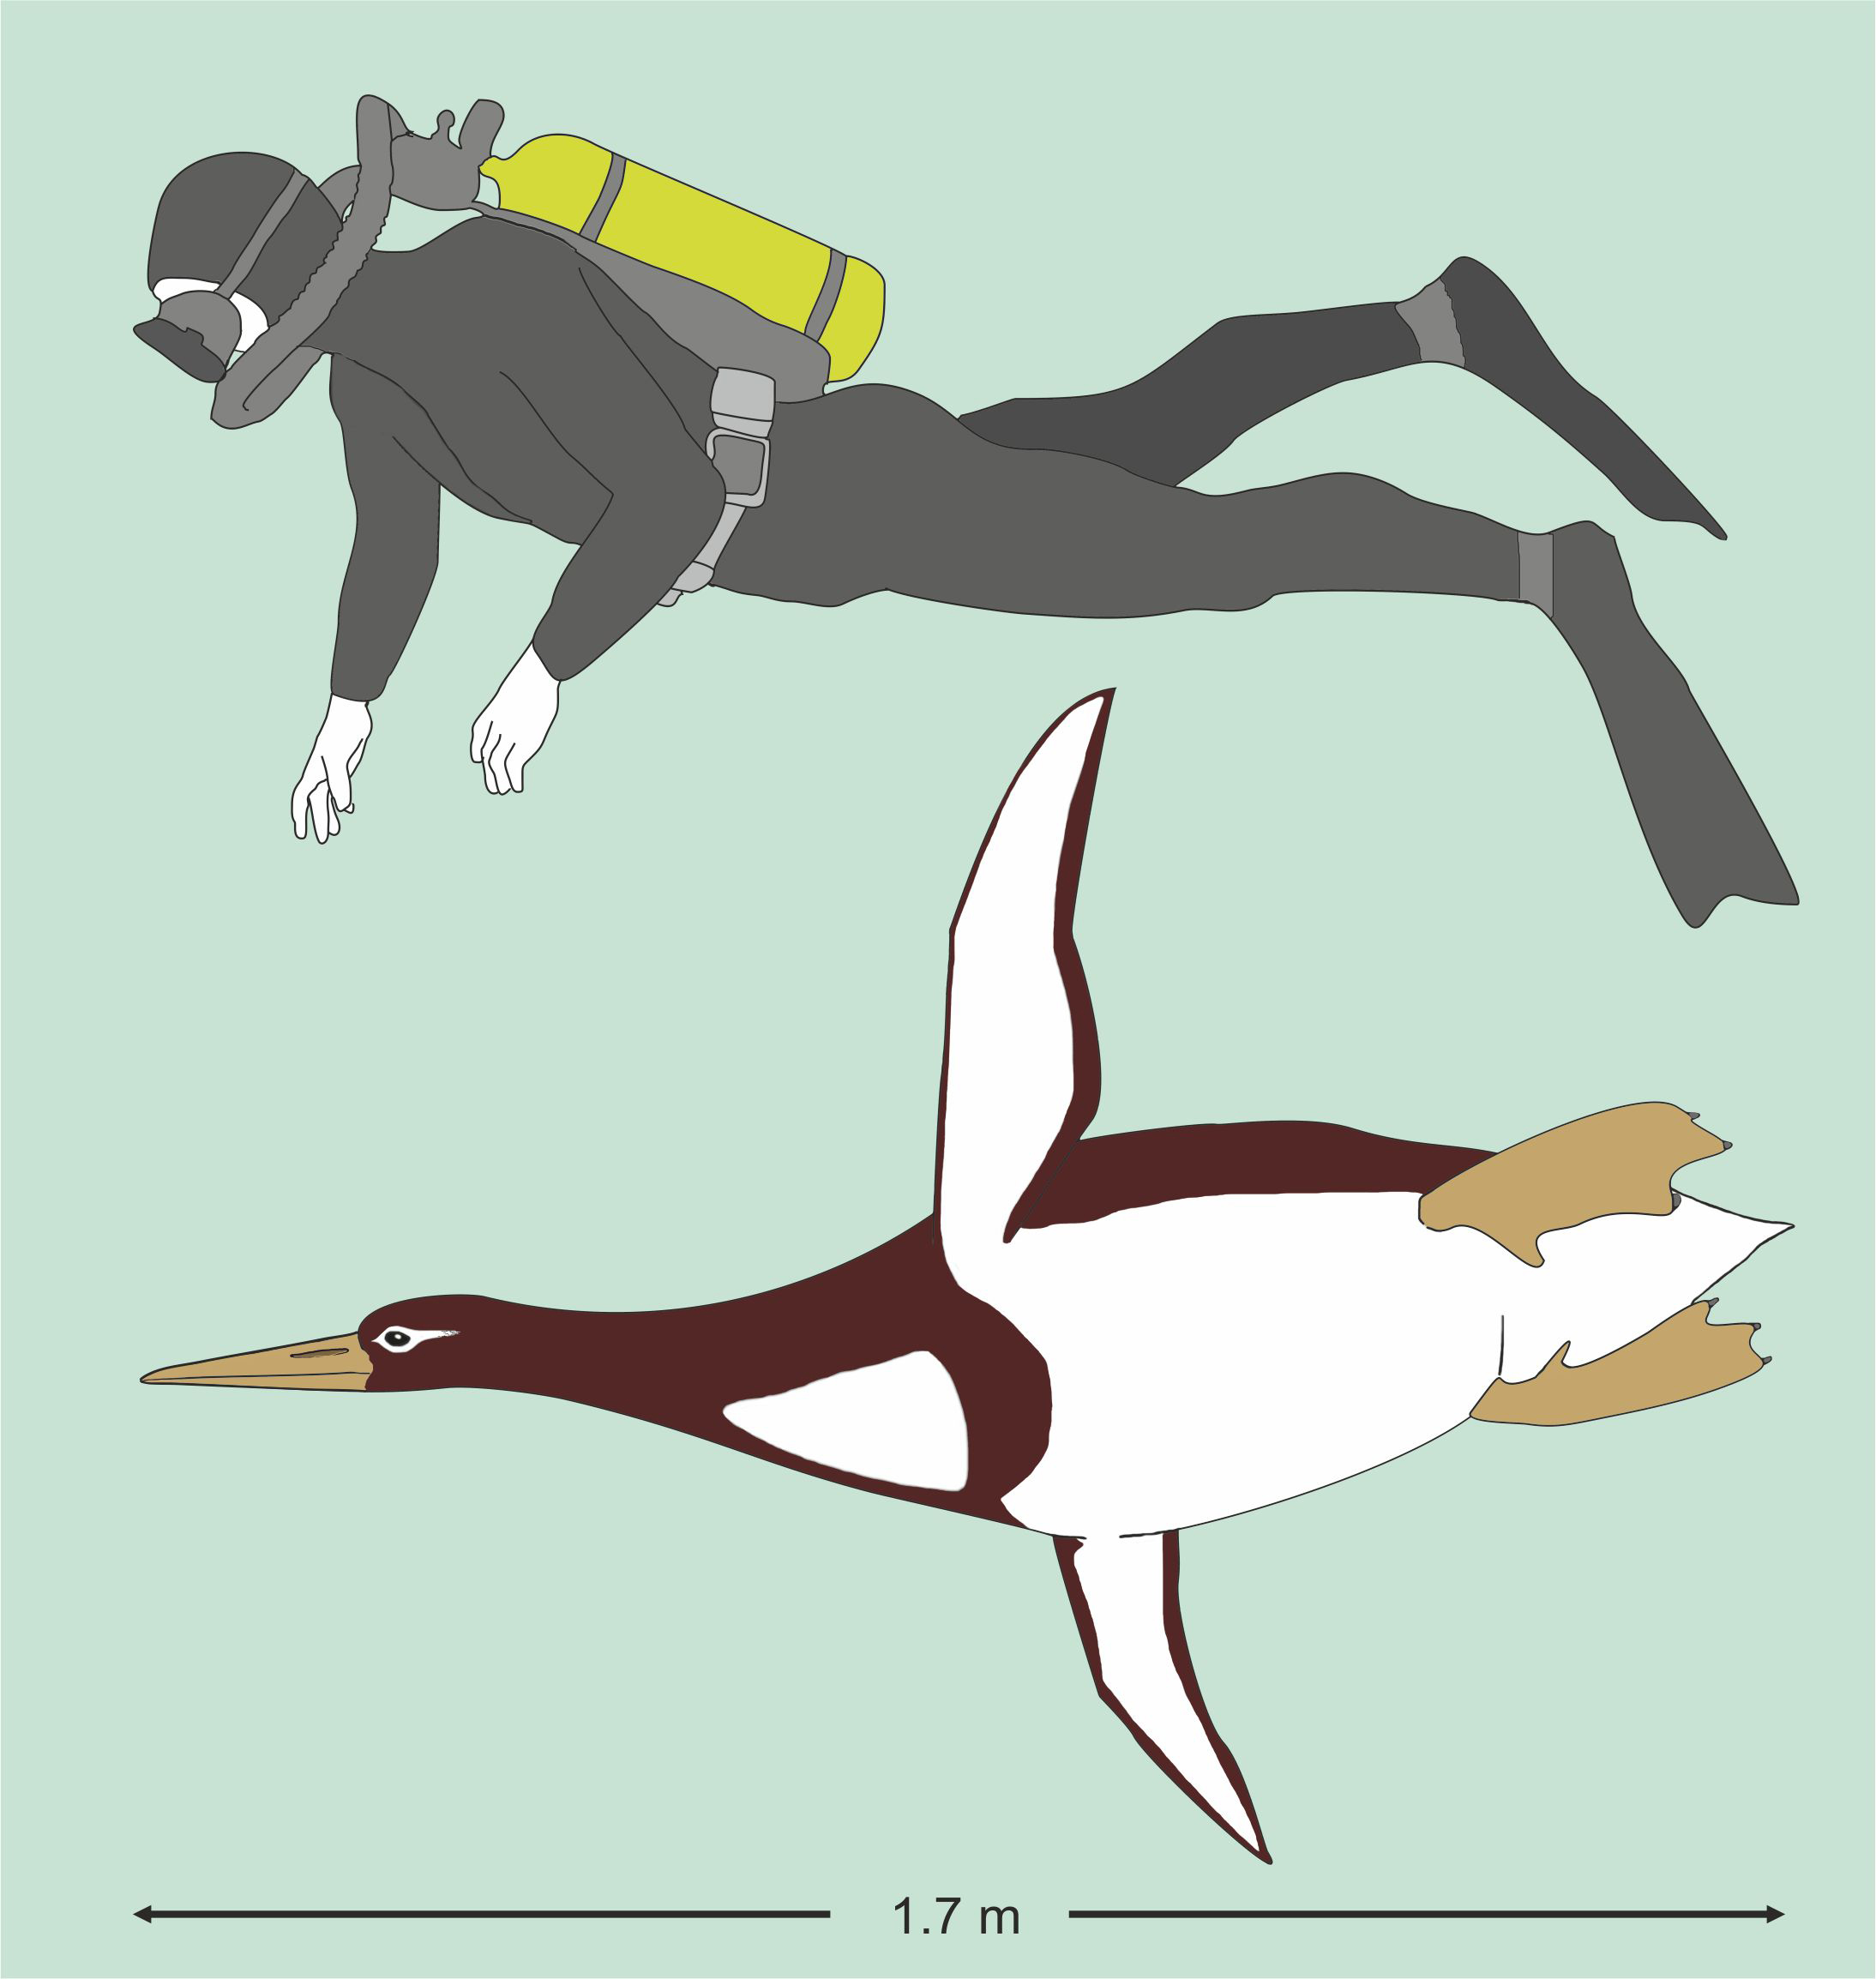 The newly identified extinct giant penguin measures 1.77m long (Senckenberg Research Institute/PA)